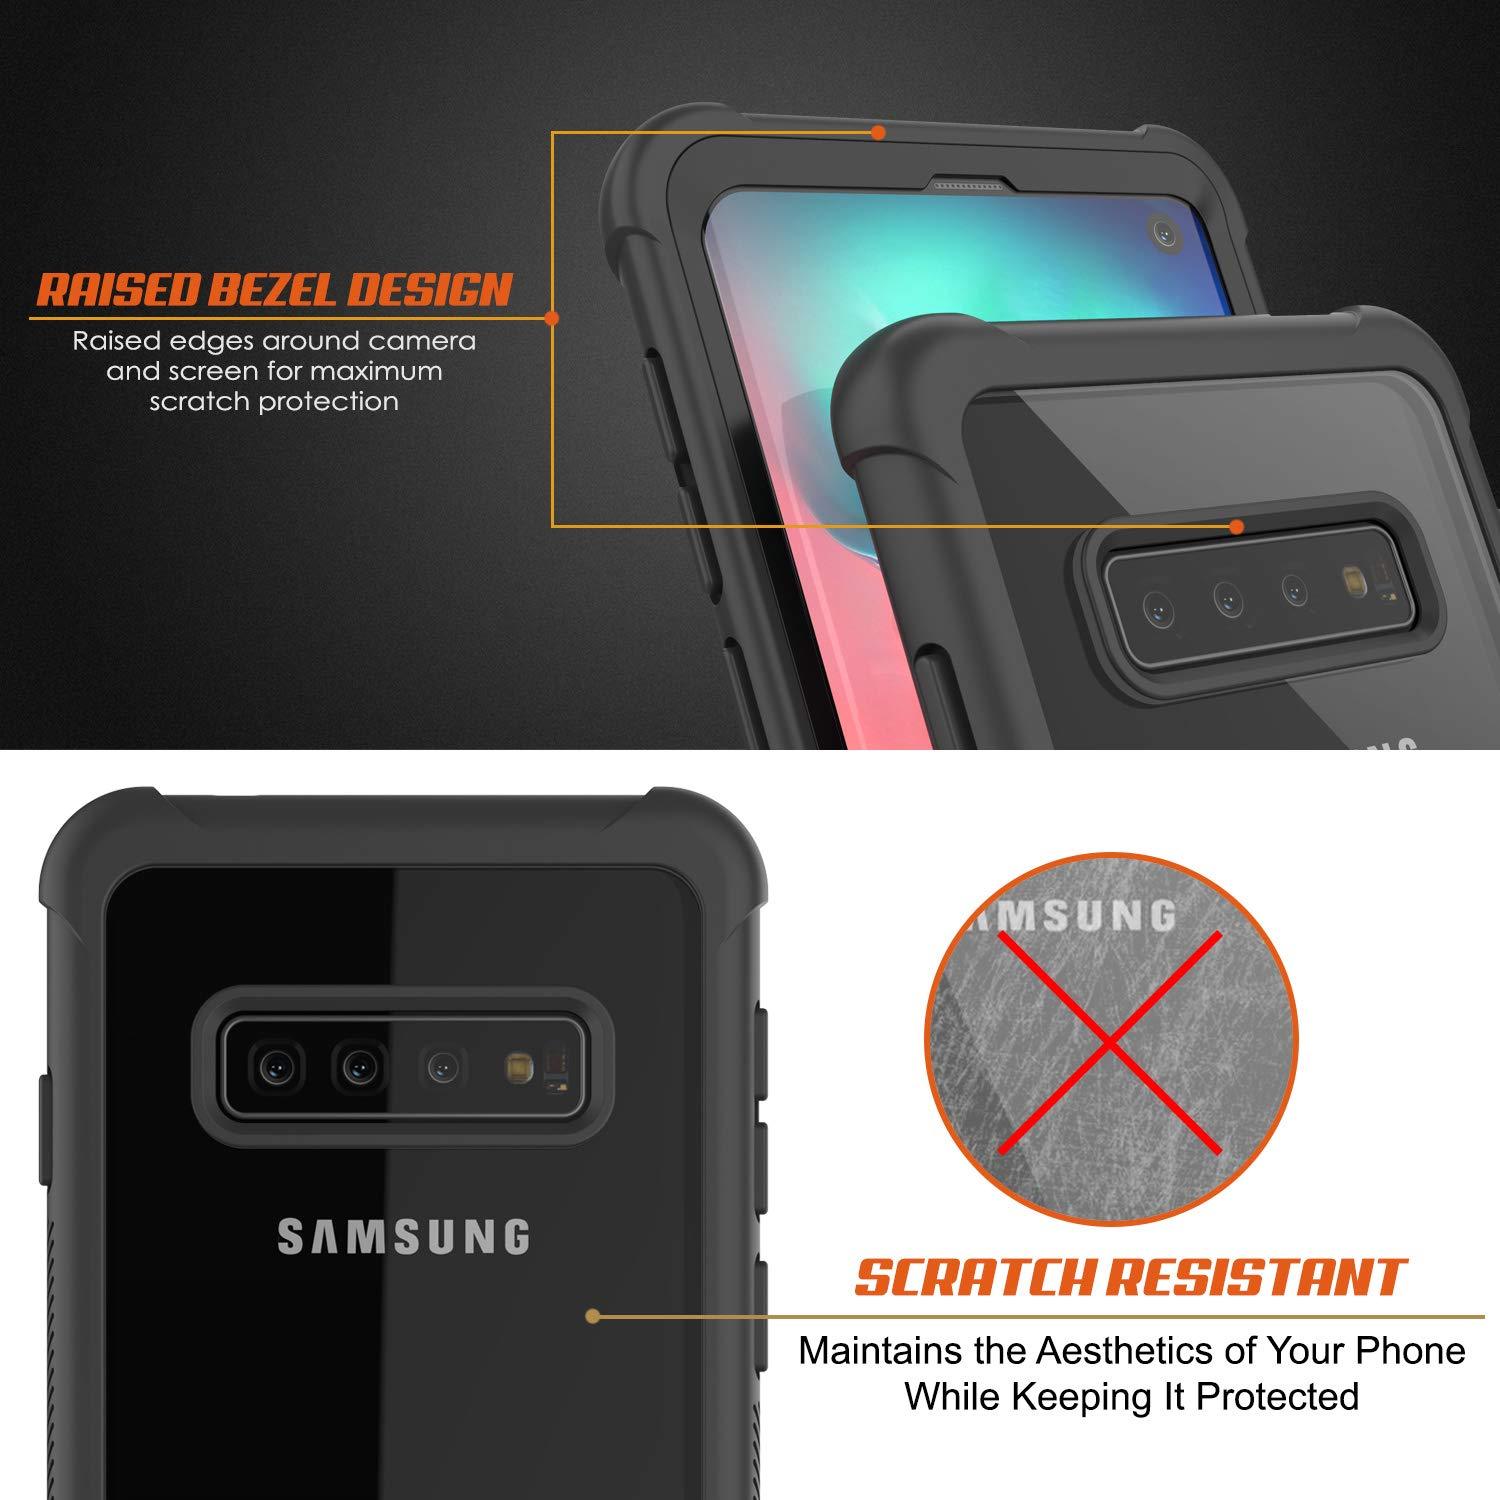 Punkcase Galaxy S22 Ultra Case [Spartan 2.0] Clear Rugged Heavy Duty Cover | Ultra Slim Military Grade Protection w/ Raised Bezel Design for Galaxy